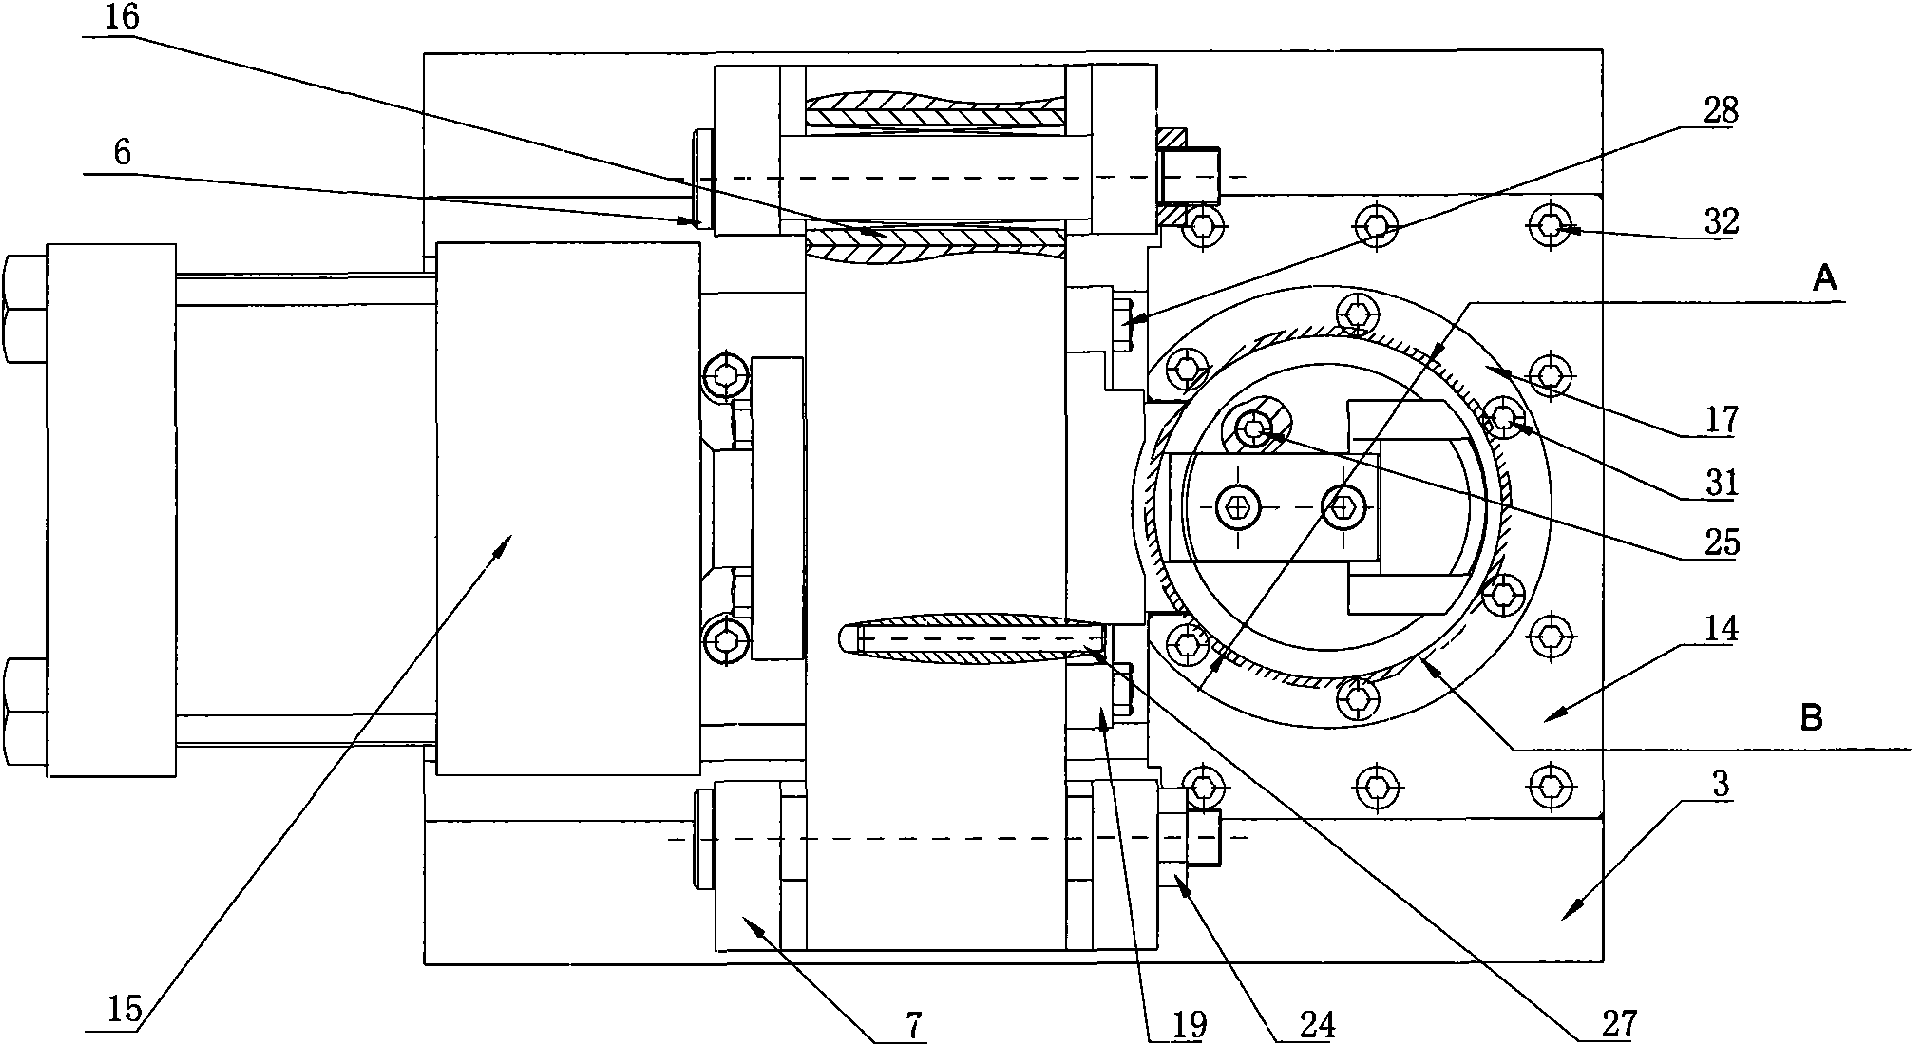 Stamping method for numerical control stamping machine tool